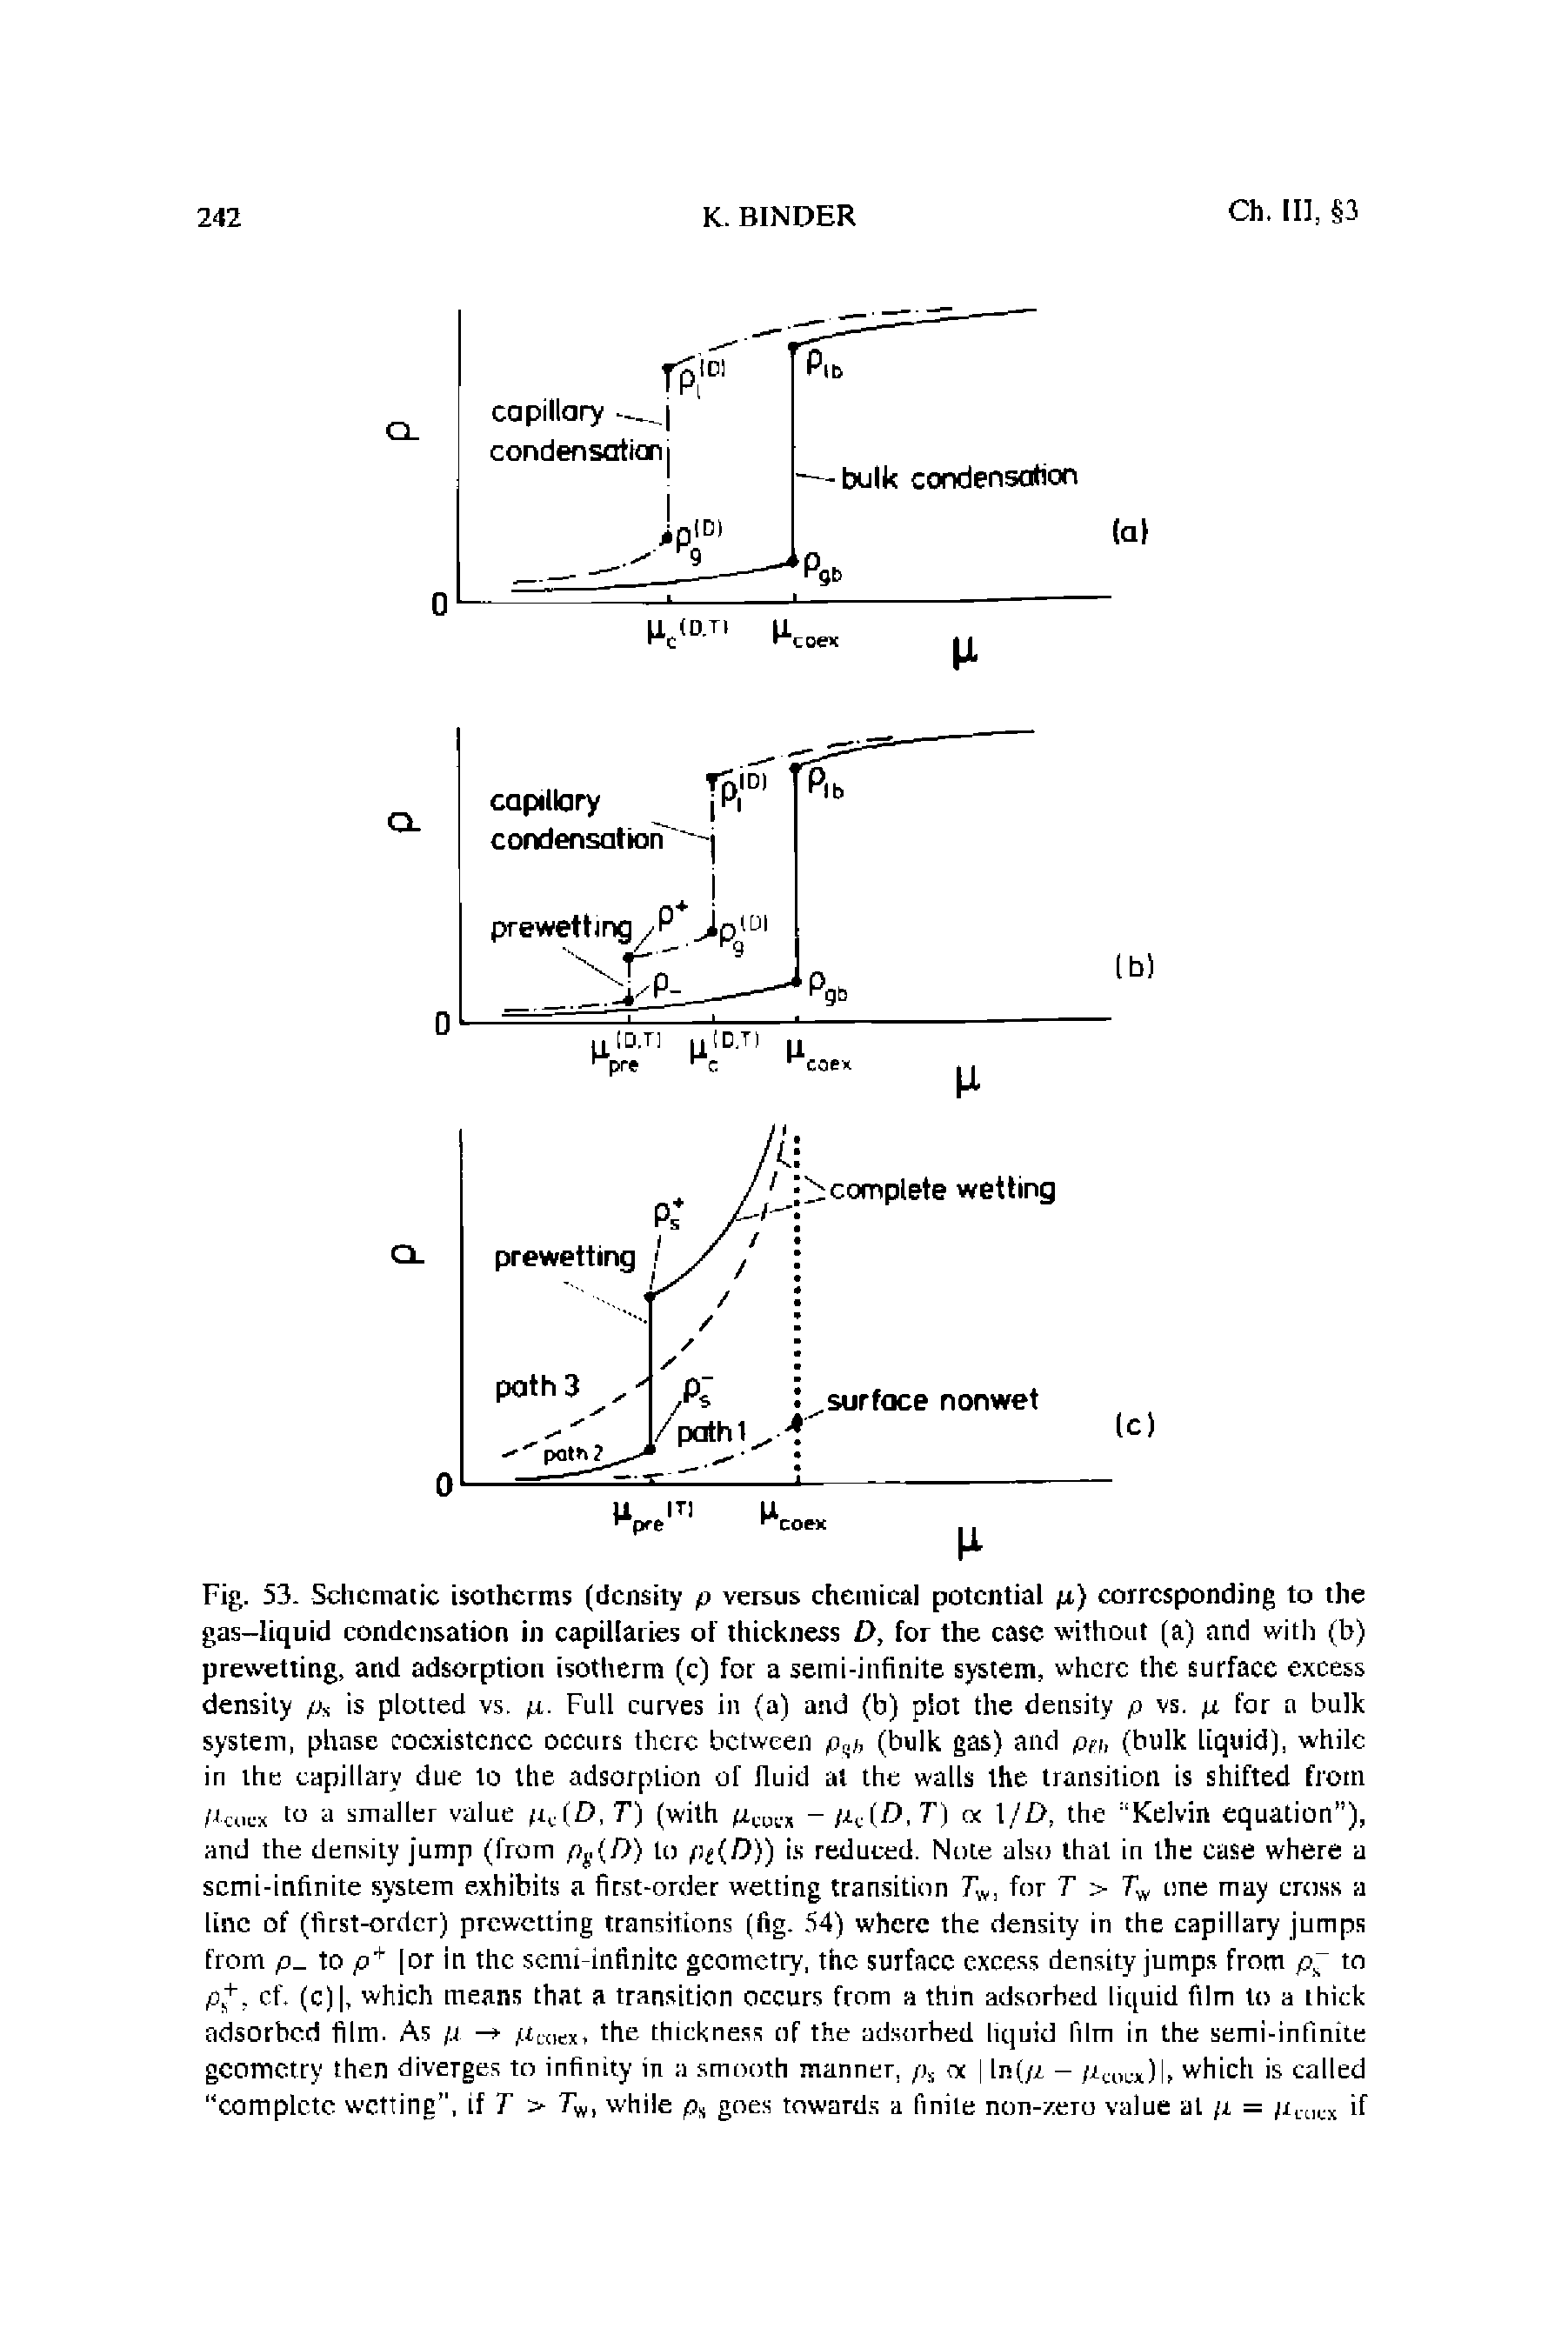 Fig. 53. Schematic isotherms (density p versus chemical potential pi) corresponding to the gas-liquid condensation in capillaries of thickness D, for the case without (a) and with (b) prewetting, and adsorption isotherm (c) for a semi-infinite system, where the surface excess density pjs is plotted vs. pi. Full curves in (a) and (b) plot the density p vs. pi for a bulk system, phase coexistence occurs there between p,p, (bulk gas) and pn, (bulk liquid), while in the capillary due to the adsorption of fluid at the walls the transition is shifted from paKX to a smaller value rc(D, 7) (with pic(7>, T) 1 /D, the Kelvin equation ), and the density jump (from ps D) to pt D)) is reduced. Note also that in the ease where a semi-infinite system exhibits a first-order wetting transition 7W, for 7 > 7W one may cross a line of (first-order) prewetting transitions (fig. 54) where the density in the capillary jumps from p to p>+ or in the semi-infinite geometry, the surface excess density jumps from p to p +, cf. (c), which means that a transition occurs from a thin adsorbed liquid film to a thick adsorbed film. As pi the thickness of the adsorhed liquid film in the semi-infinite...